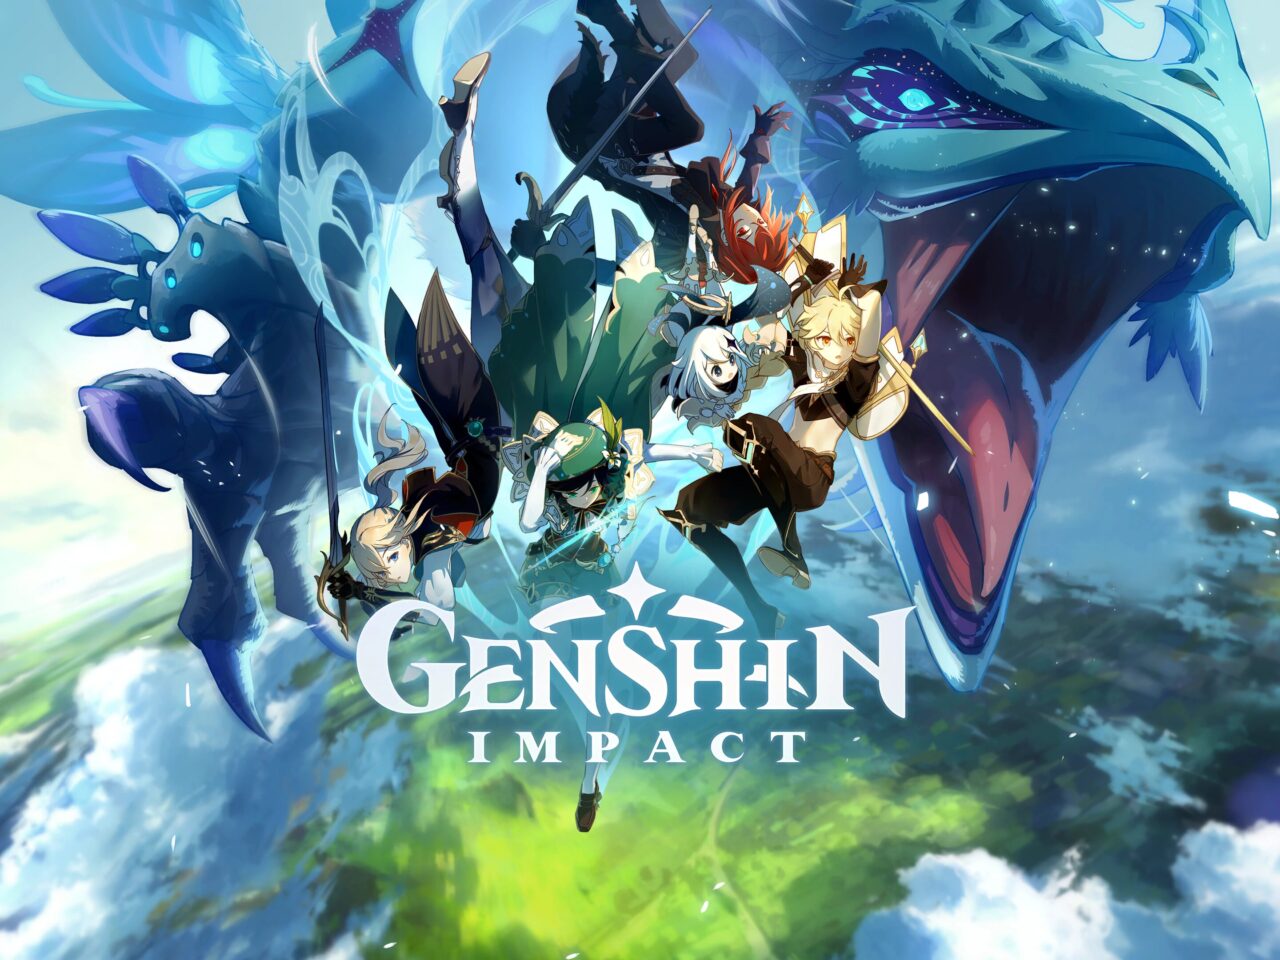 Genshin Impact - Dragon and Party title image - Genshin Impact PC Requirements